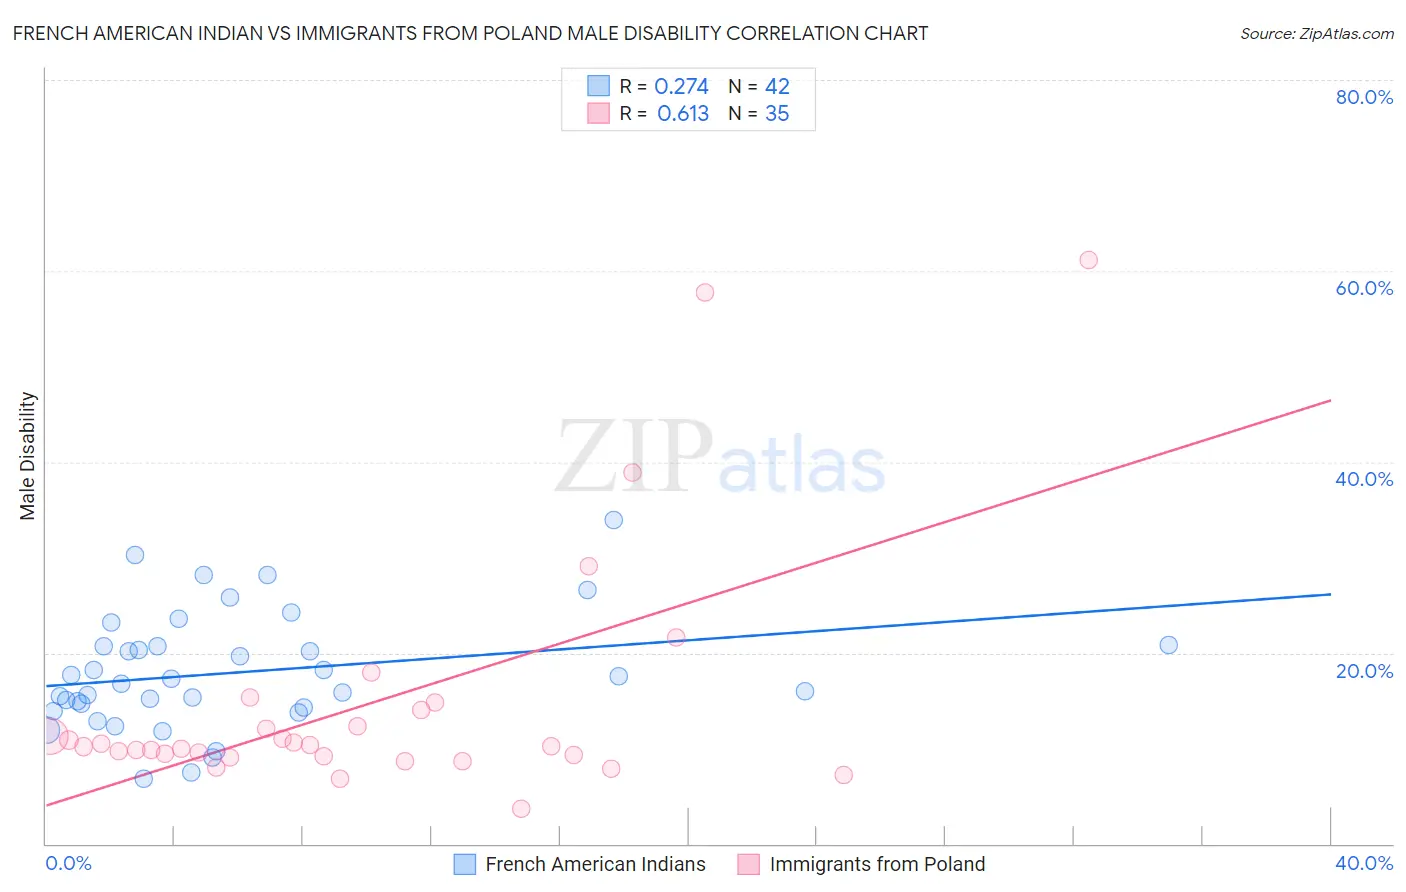 French American Indian vs Immigrants from Poland Male Disability